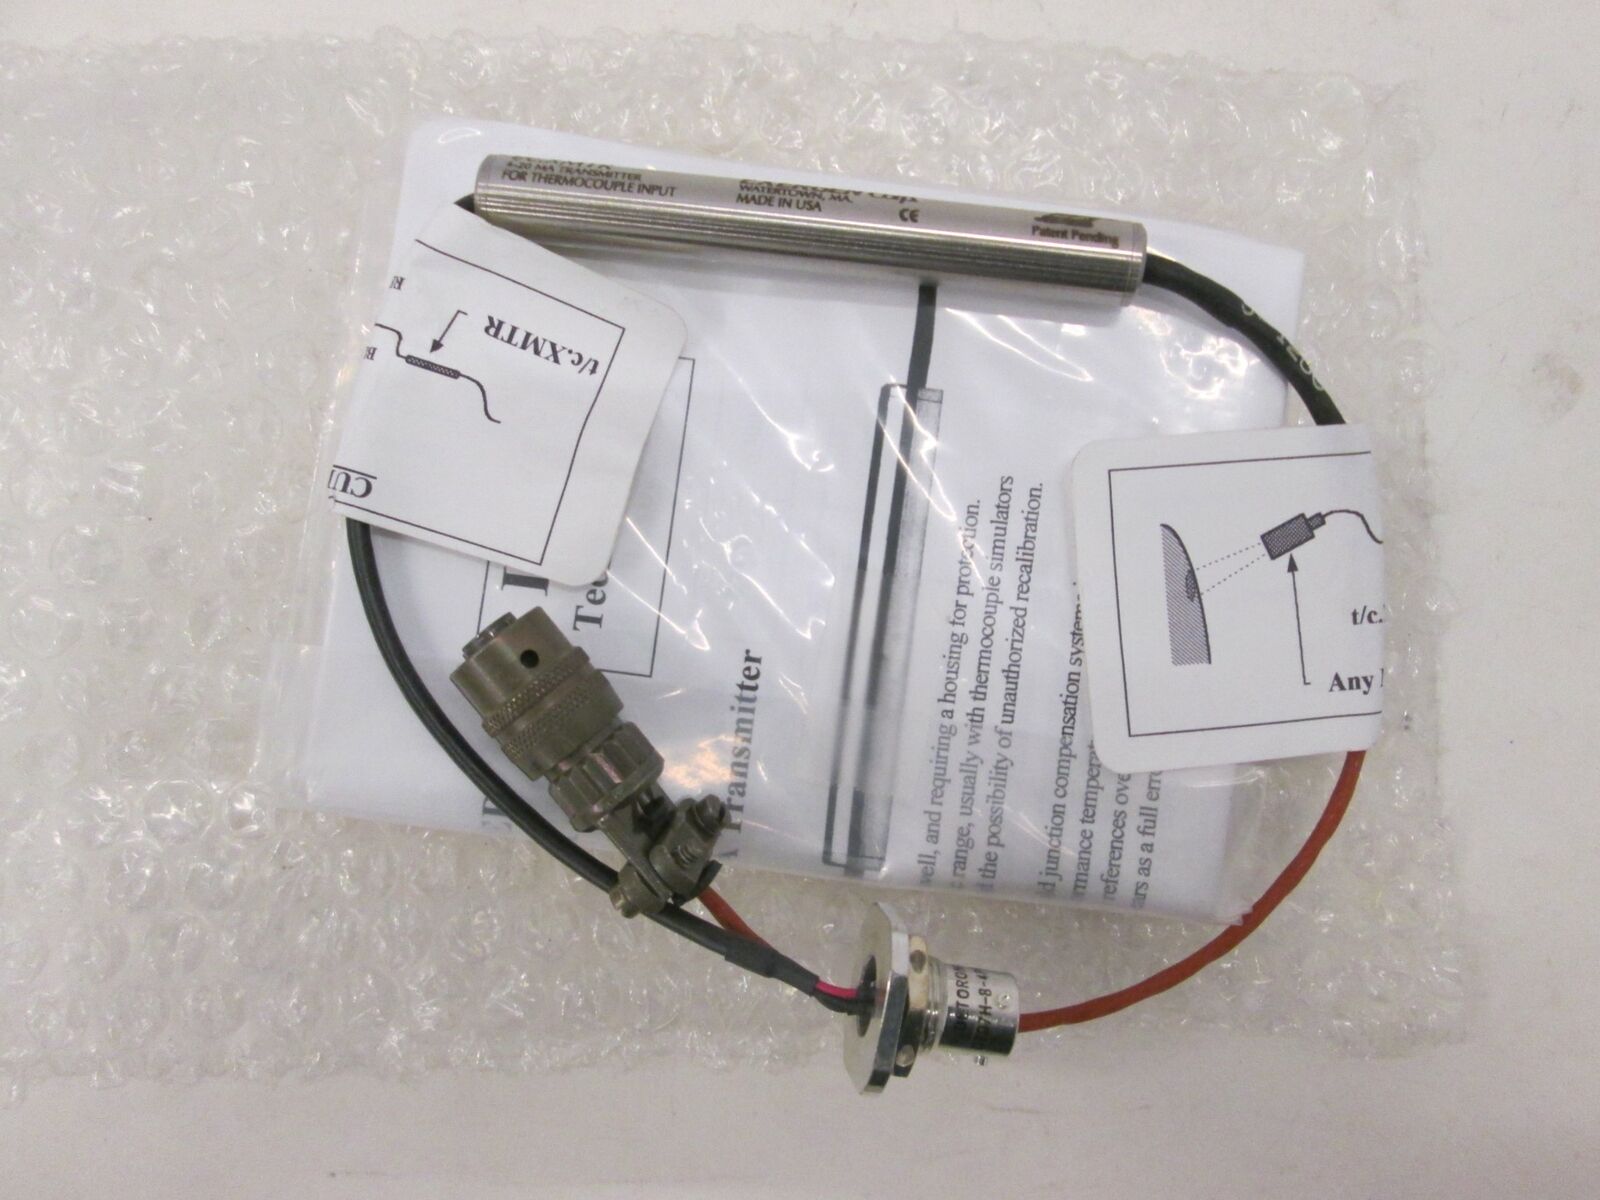 Exergen Corp, T/C. XMTR, 4-20 MA Transmitter for Thermocouple Input, New